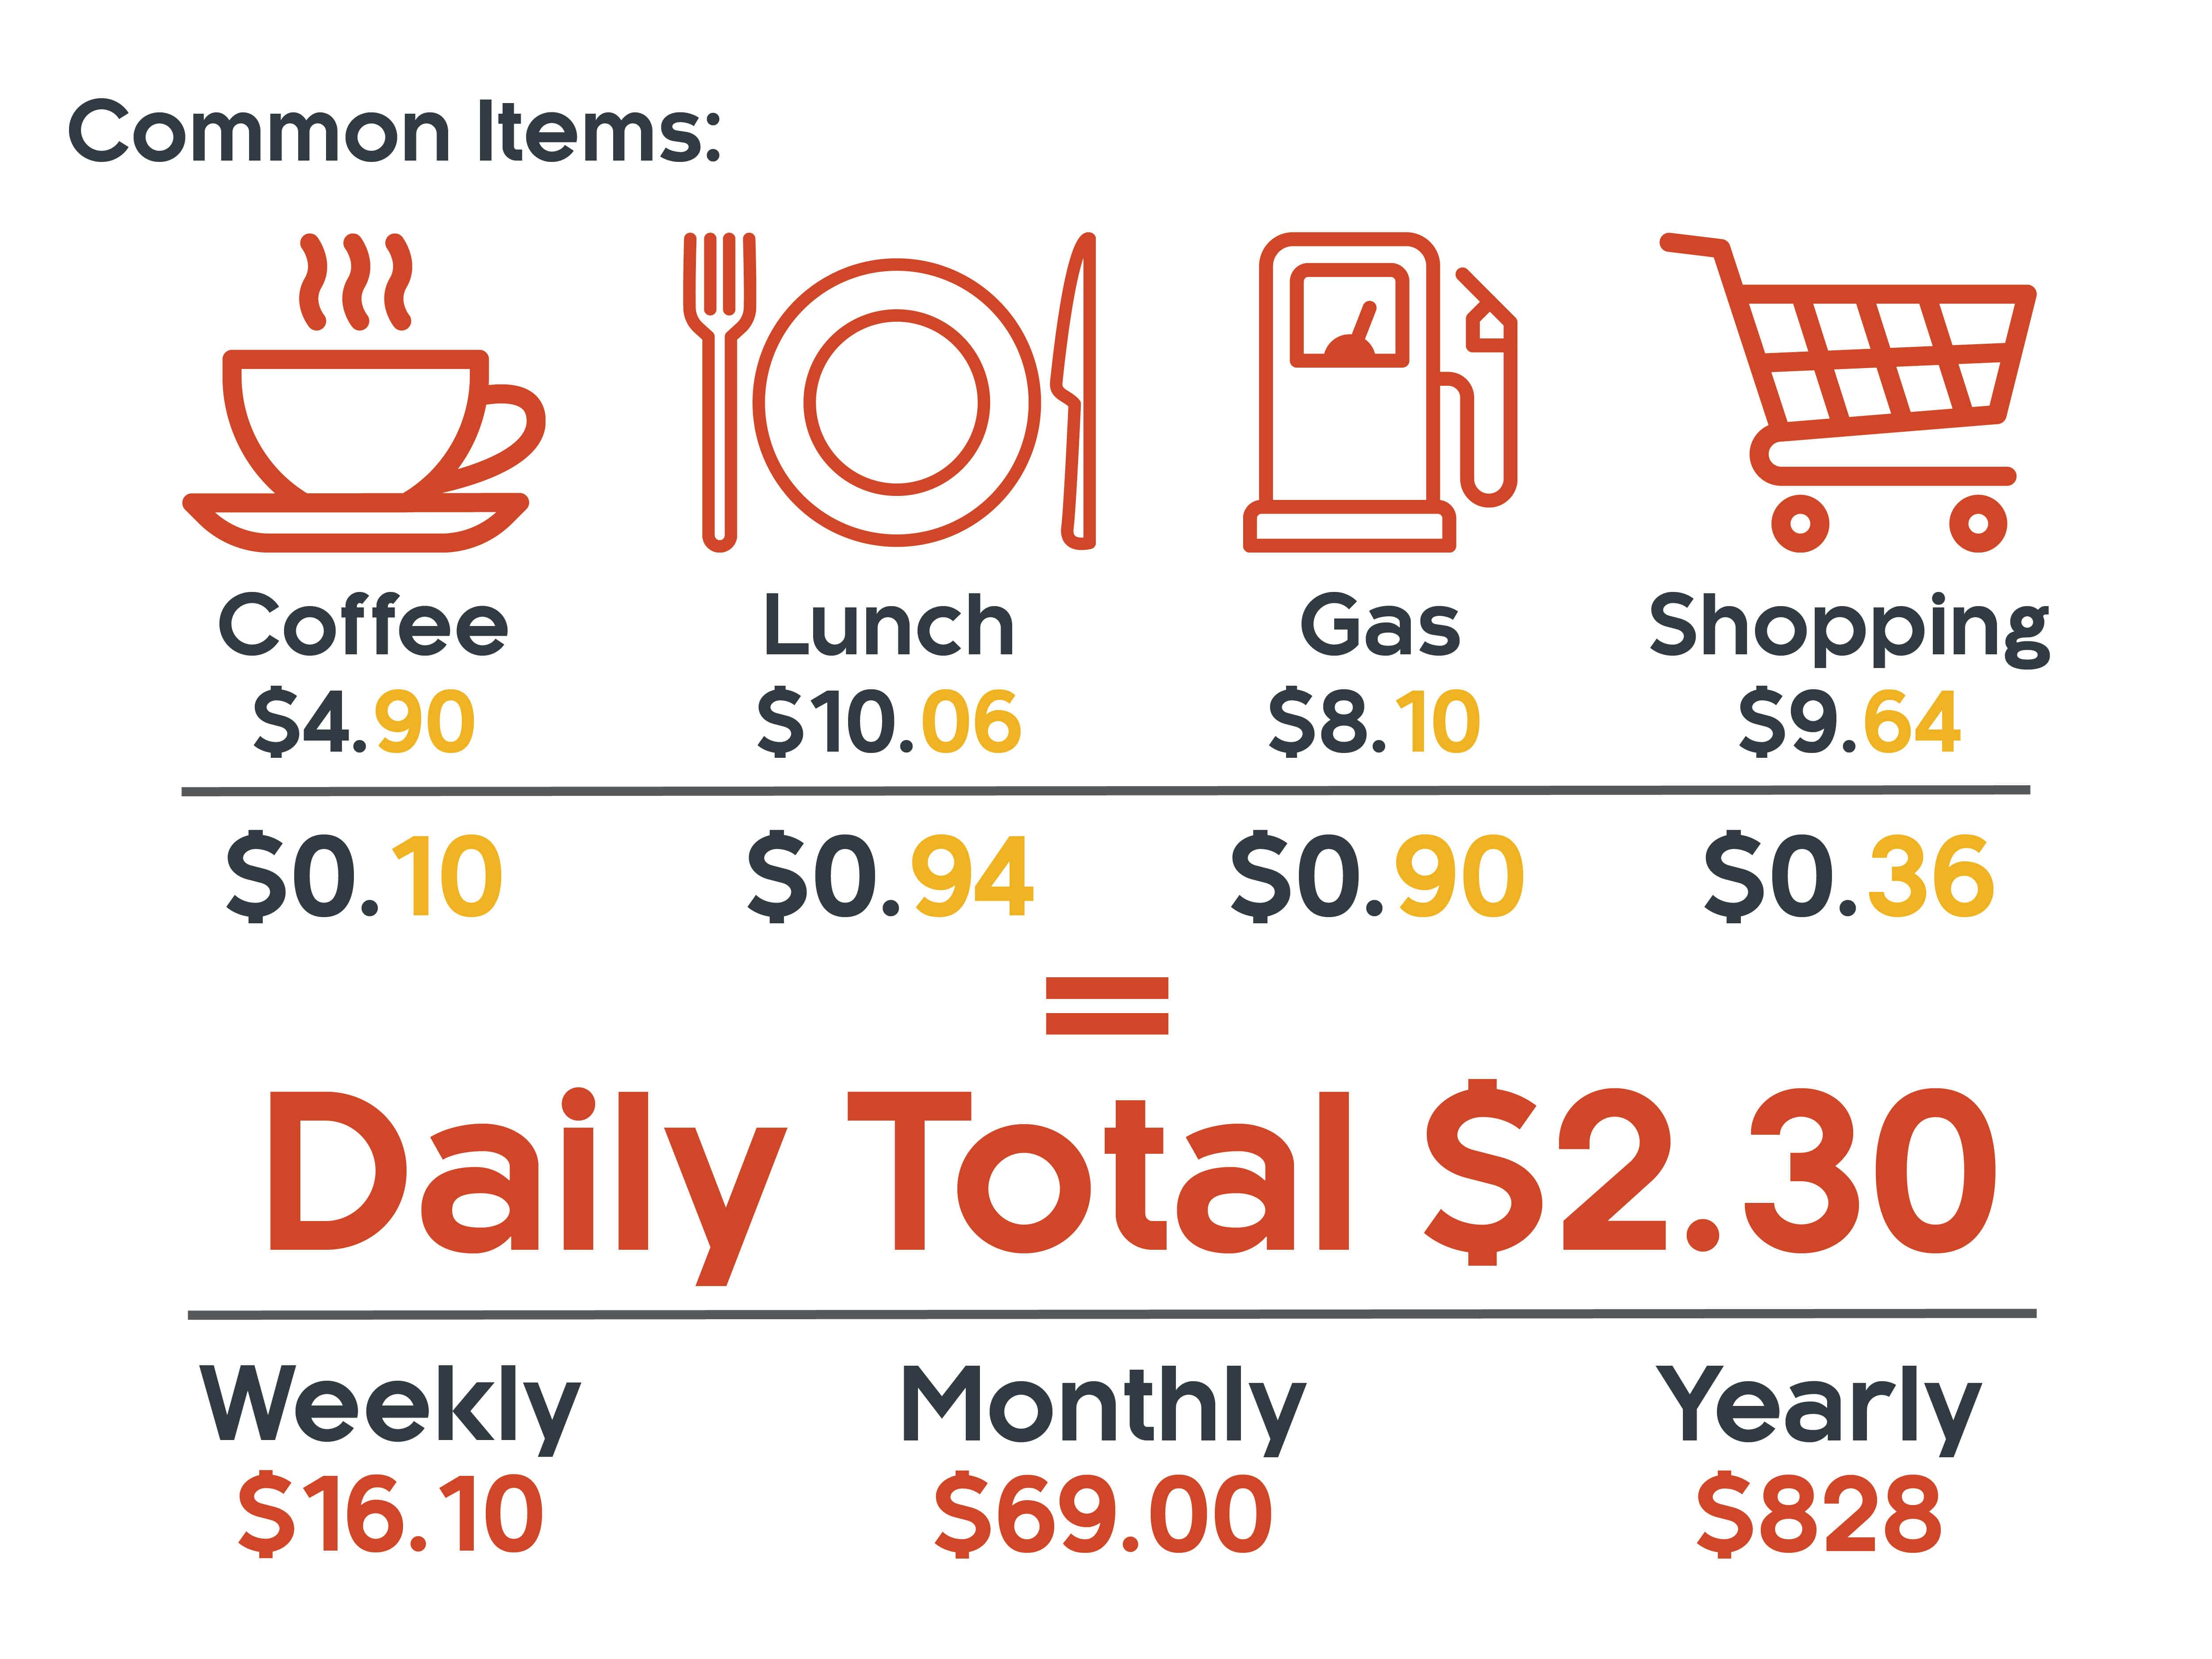 Common items to round up to see daily, weekly, monthly and yearly growth.